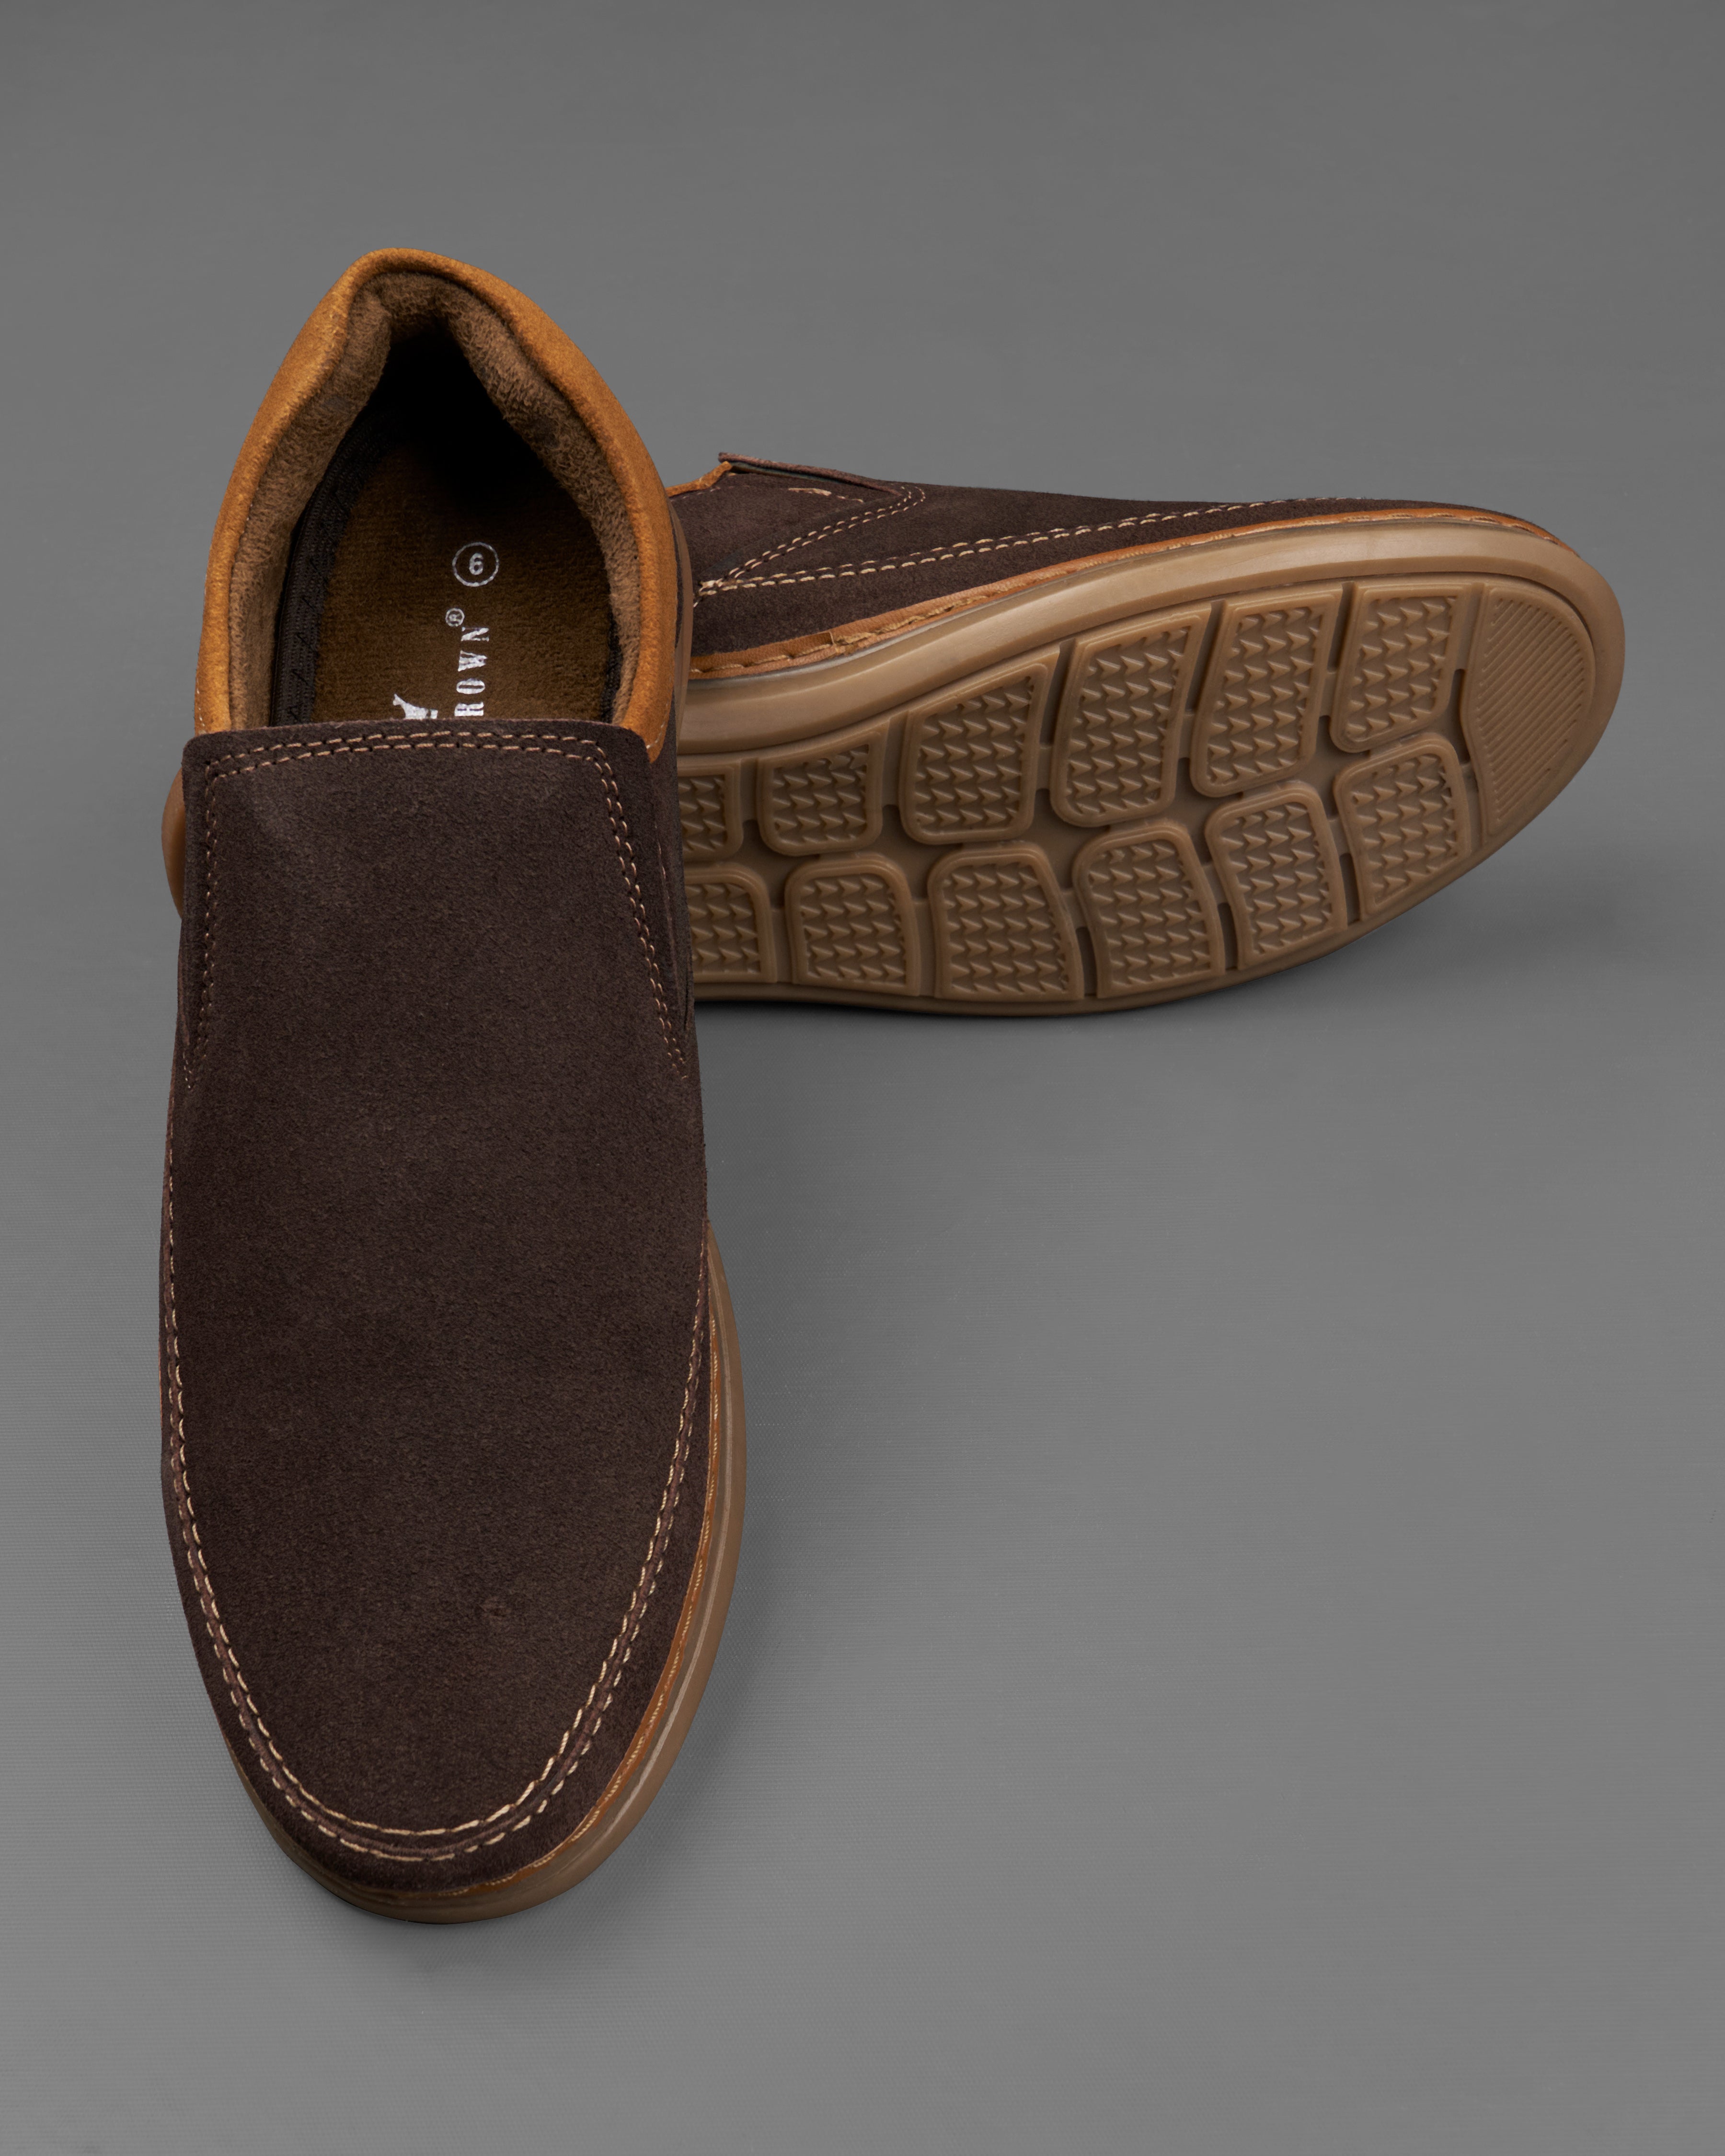 Deep Coffee Brown Slip On Suede leather Shoes FT074-6, FT074-7, FT074-8, FT074-9, FT074-10, FT074-11